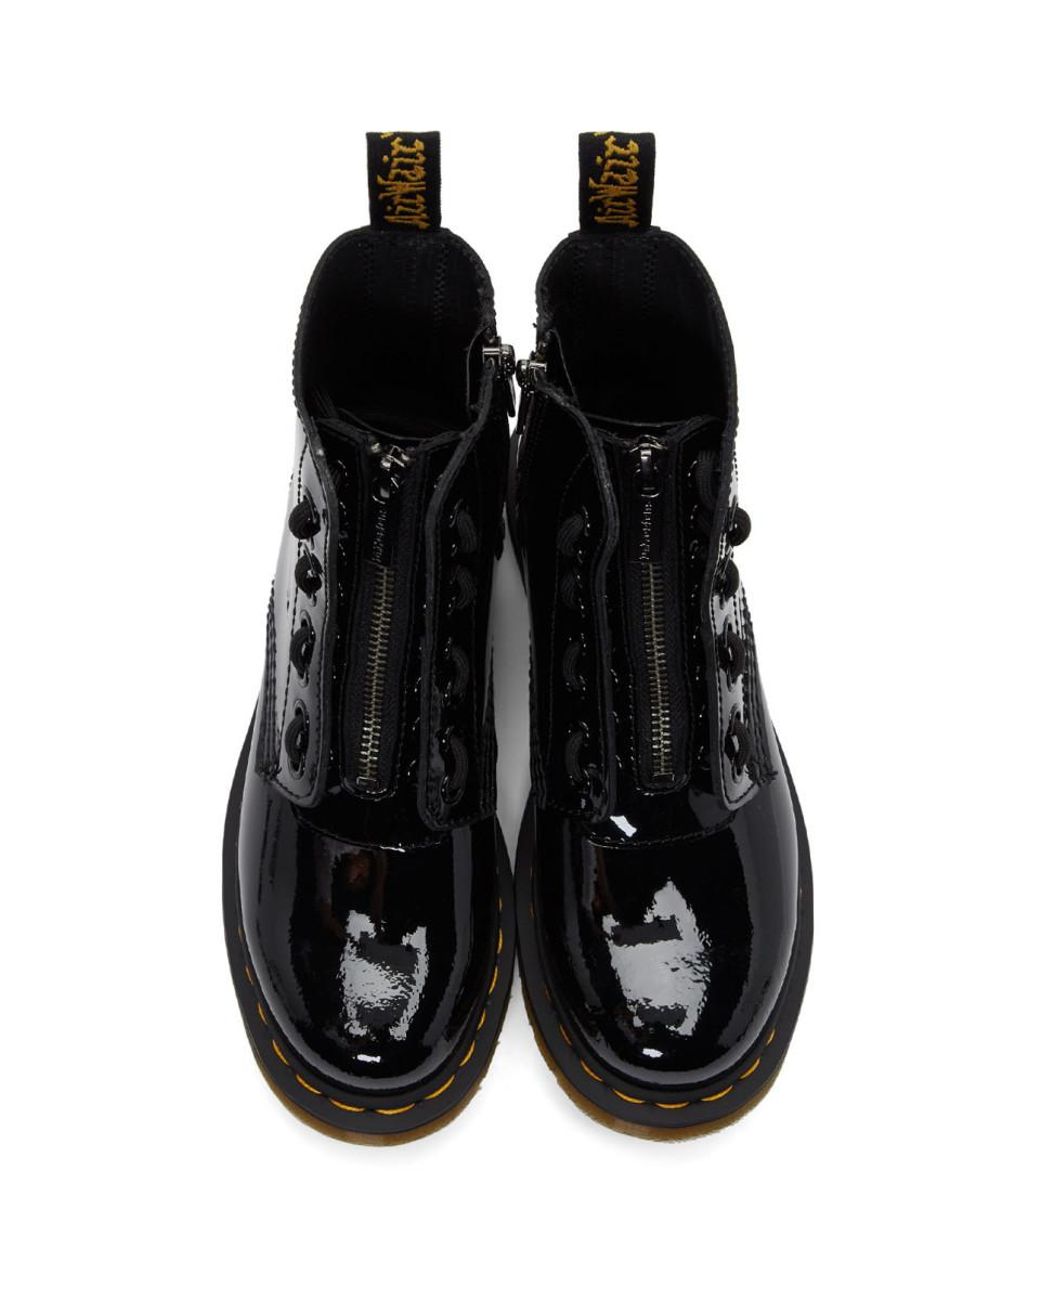 Dr. Martens Leather Black Patent 1460 Pascal Front Zip Boots | Lyst